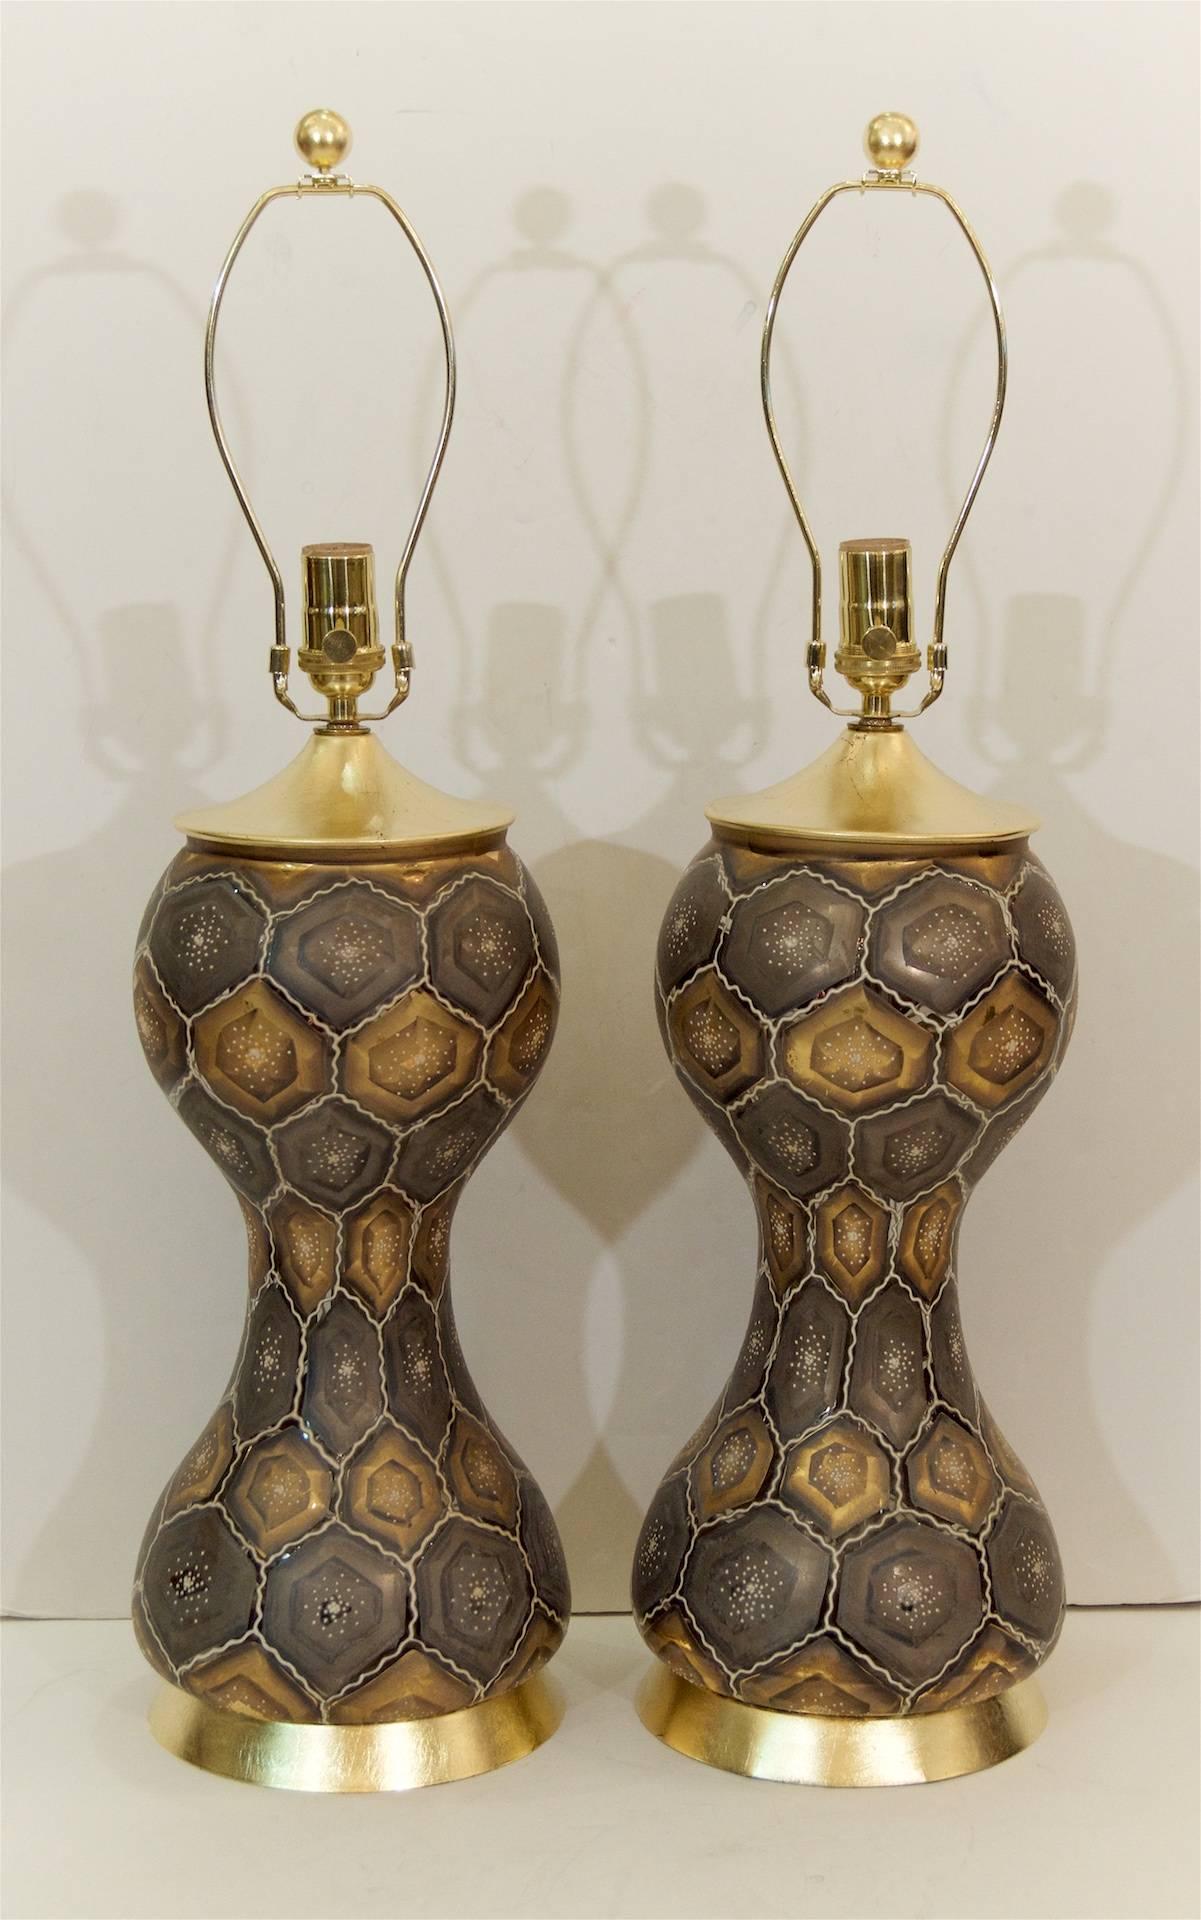 Mid-Century Modern Pair of Moroccan Style Painted Glass Table Lamps with Gold Leaf Accents